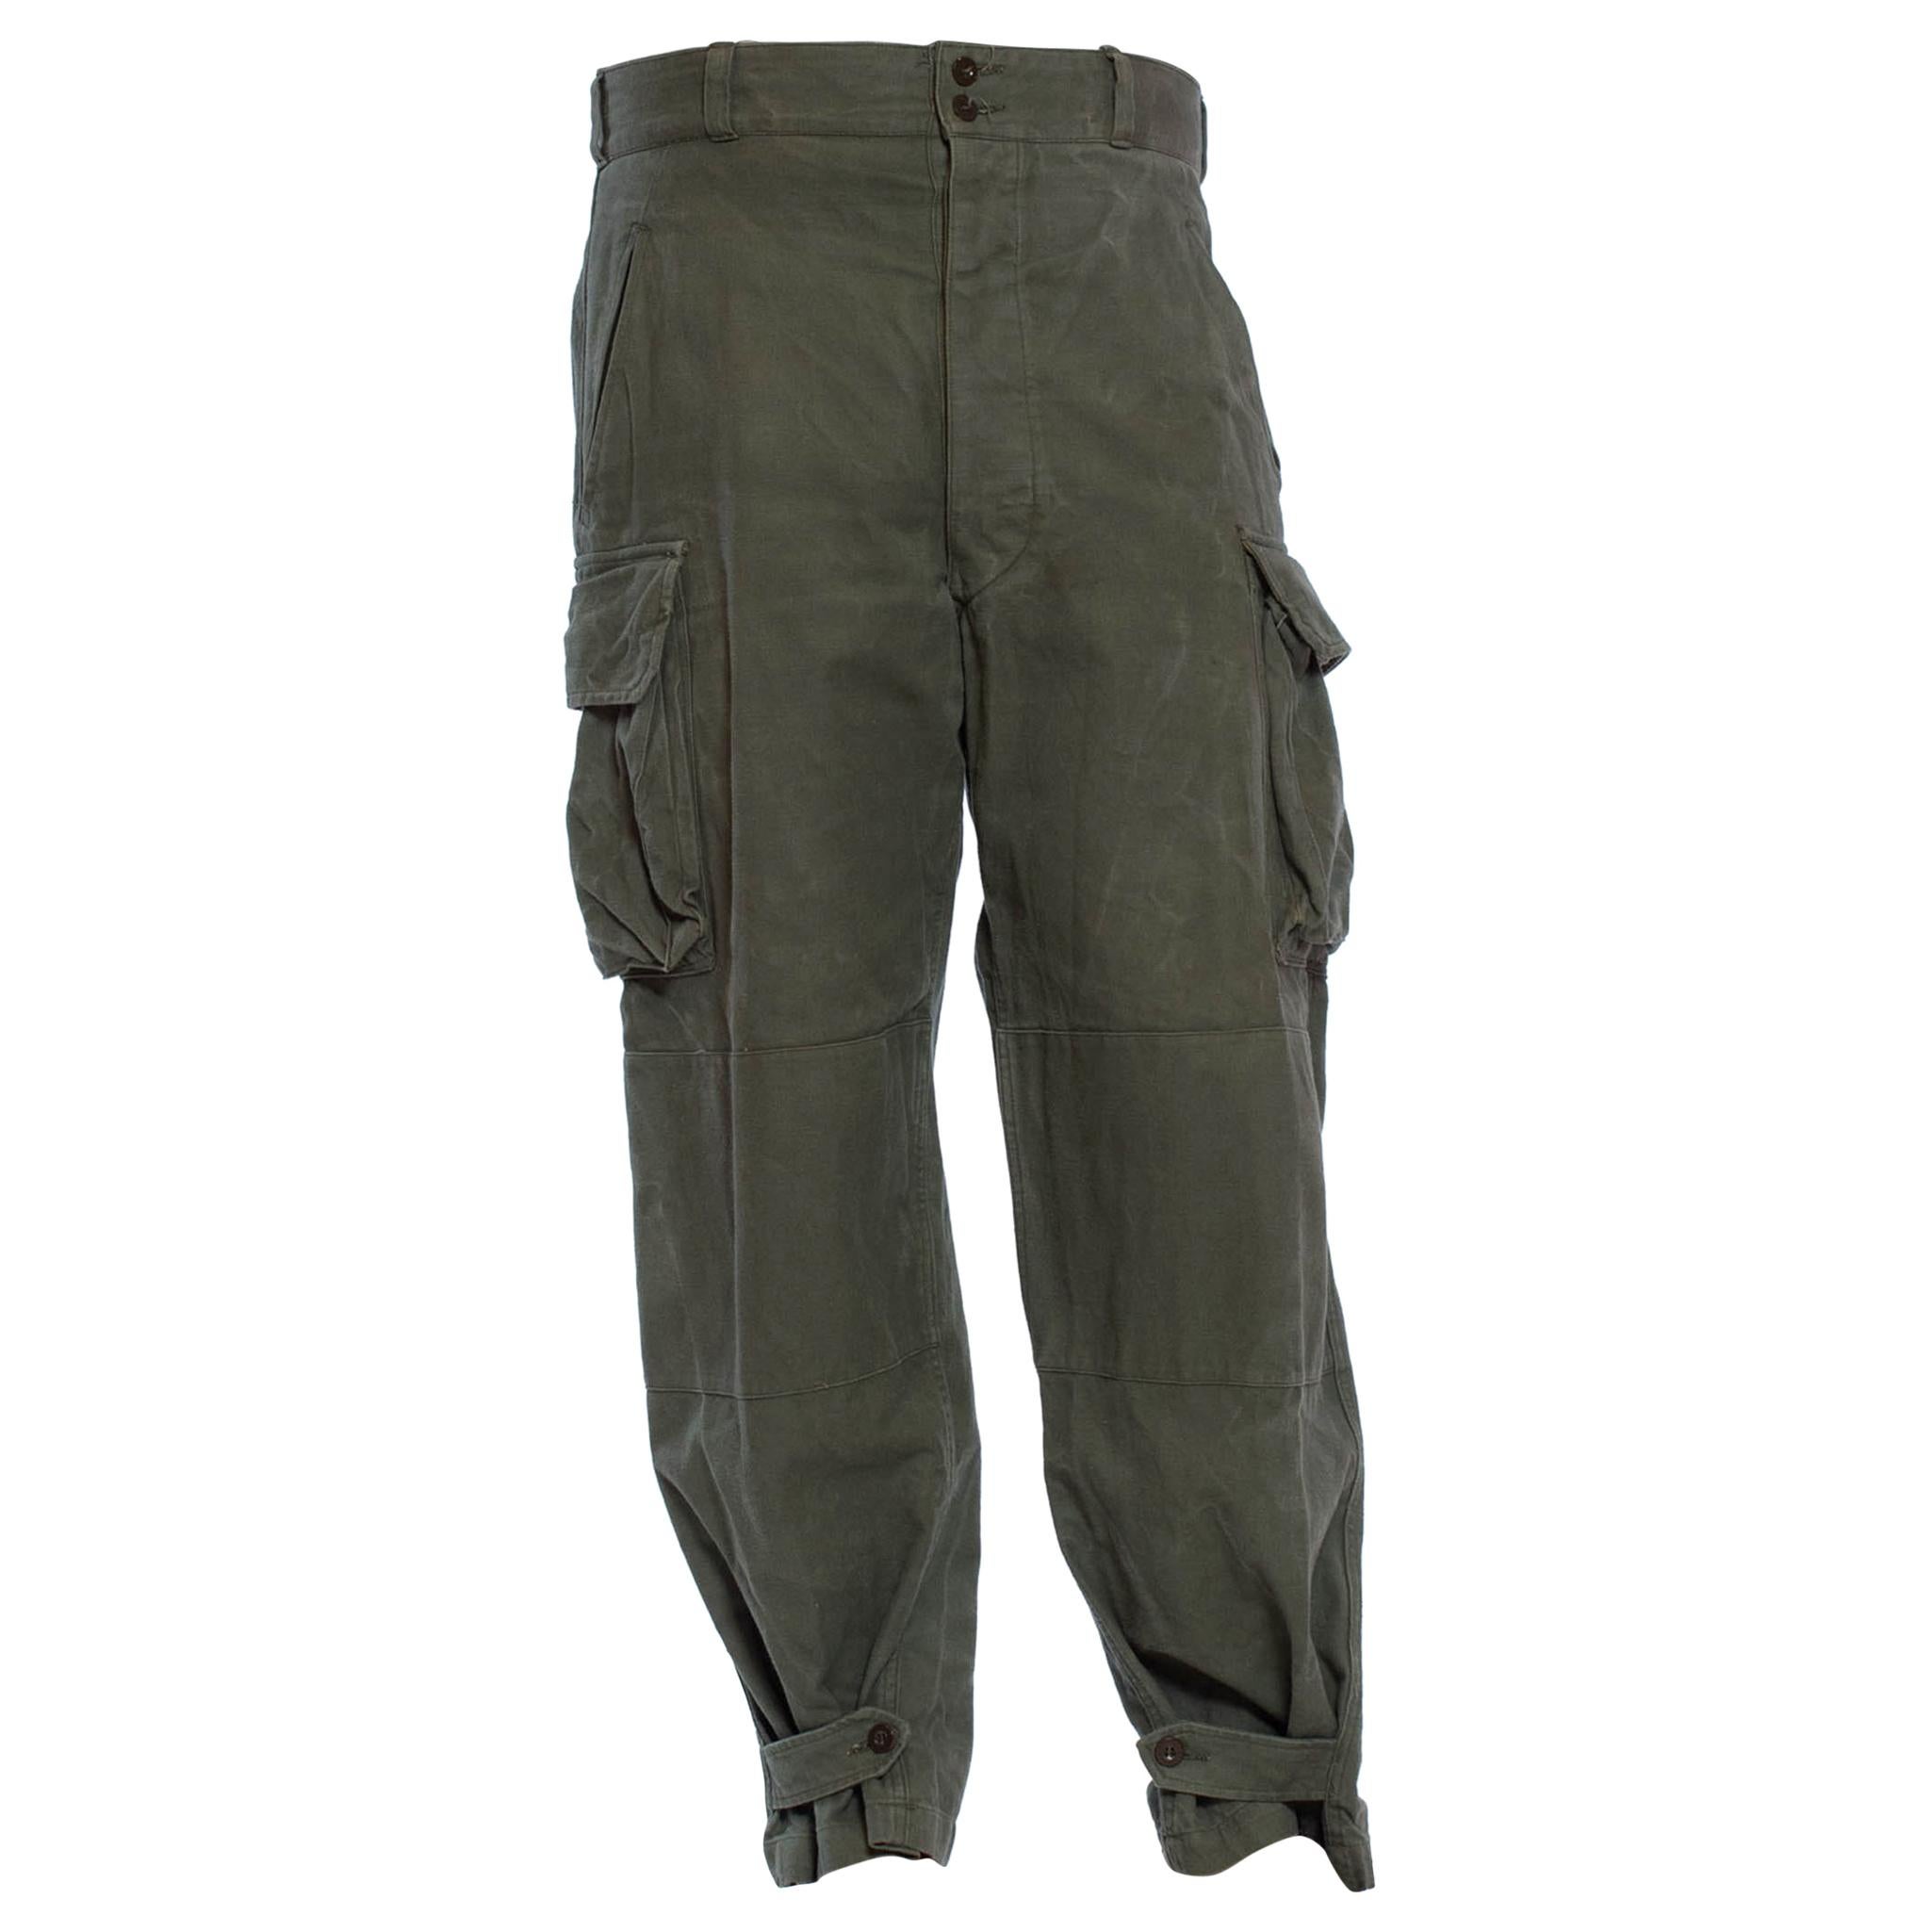 1950S Olive Green Cotton Men's French Military Utility Pants With Cargo Pockets